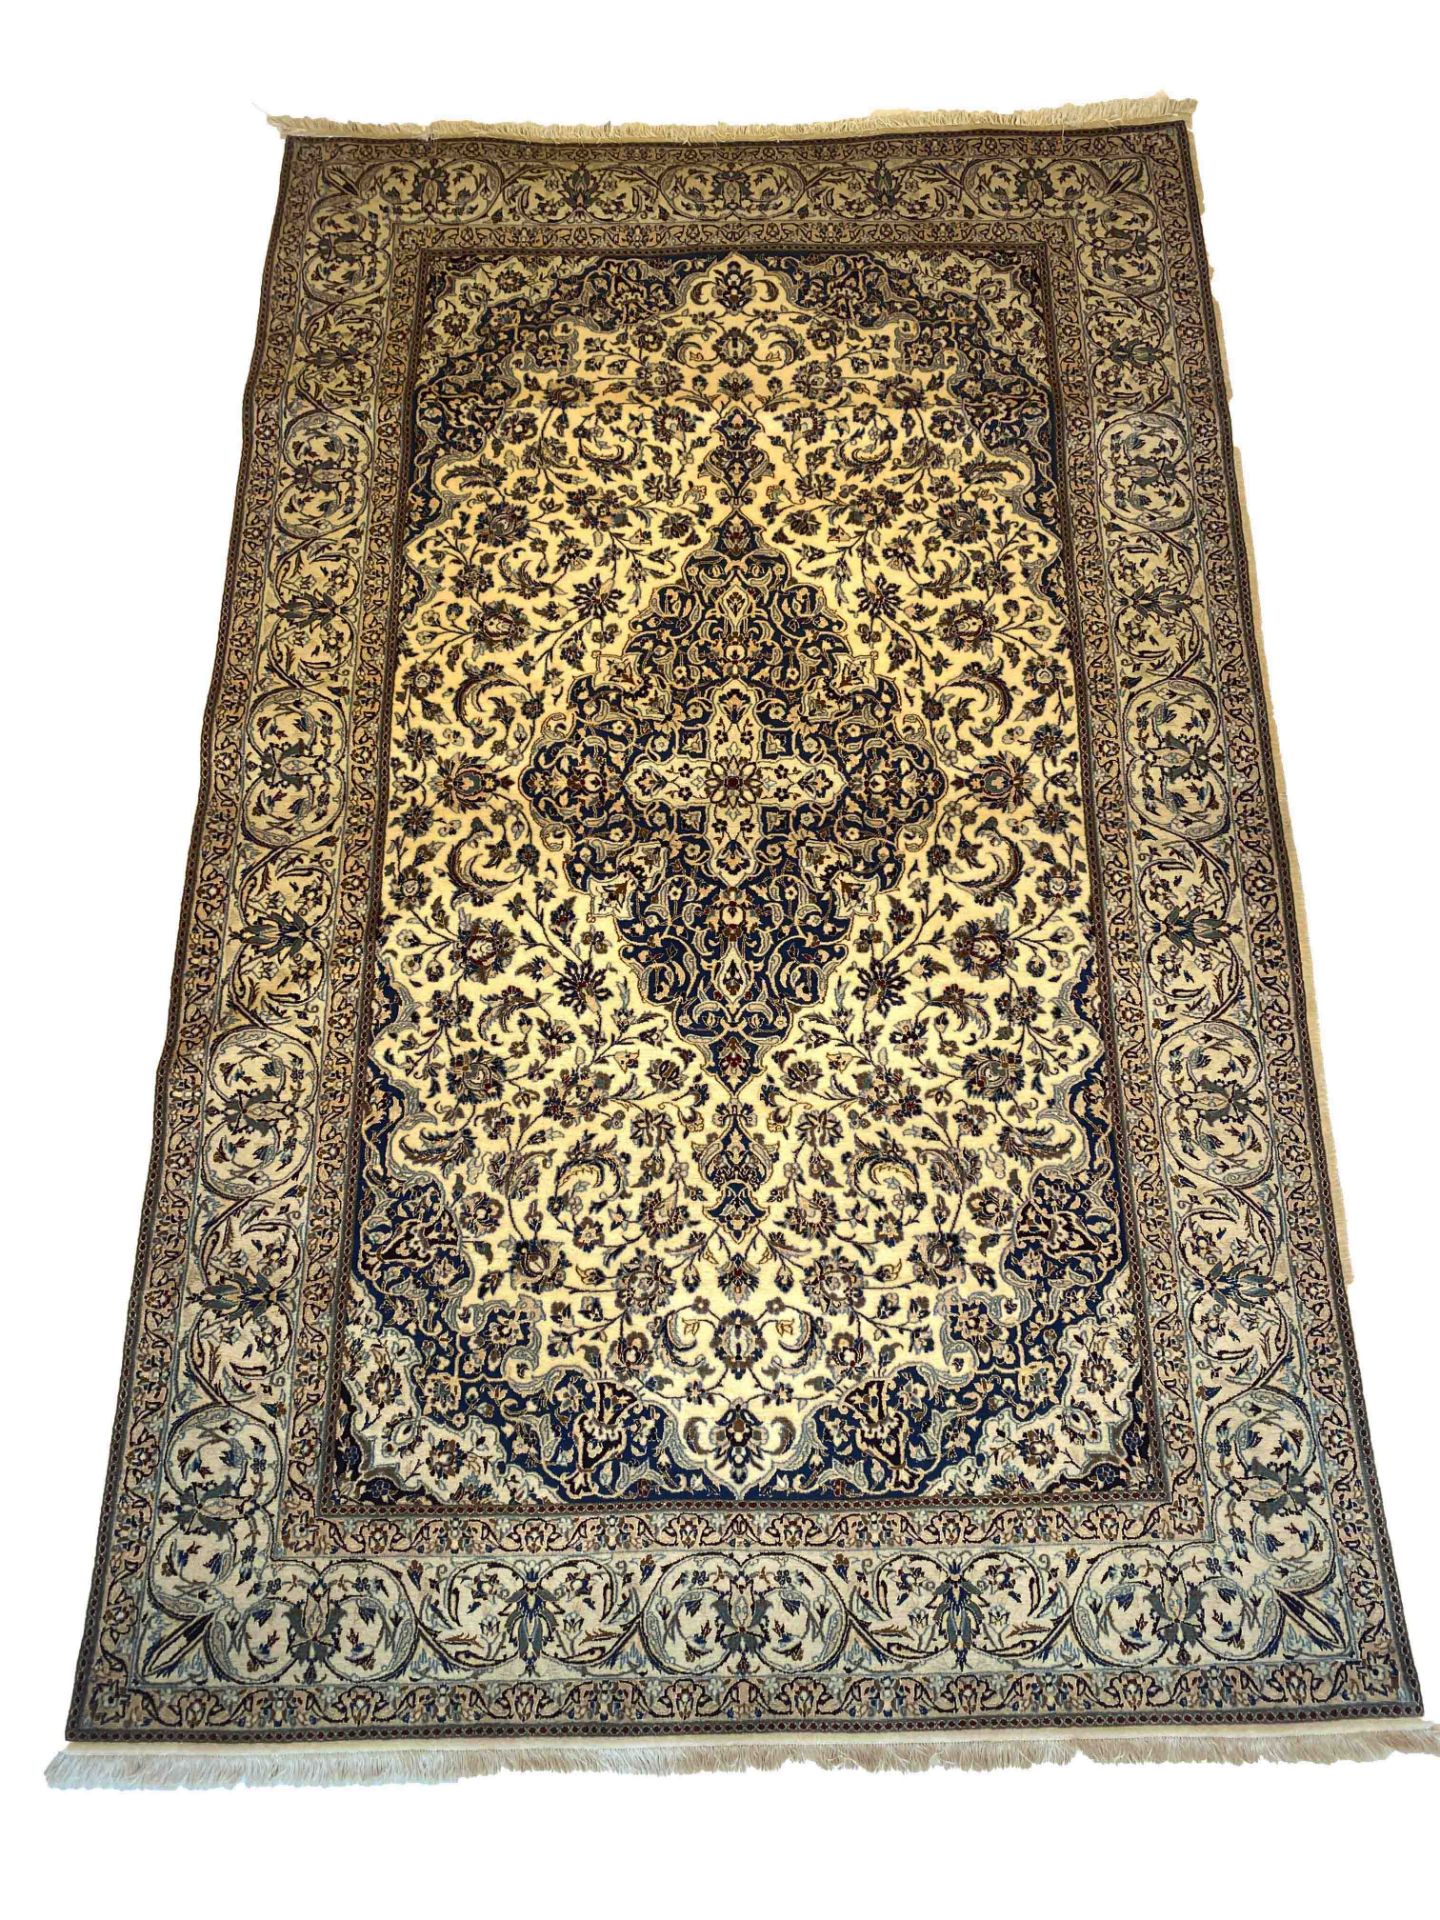 Carpet, Nain, wool and silk, good condition, 248 x 167 cm - The carpet can only be viewed and